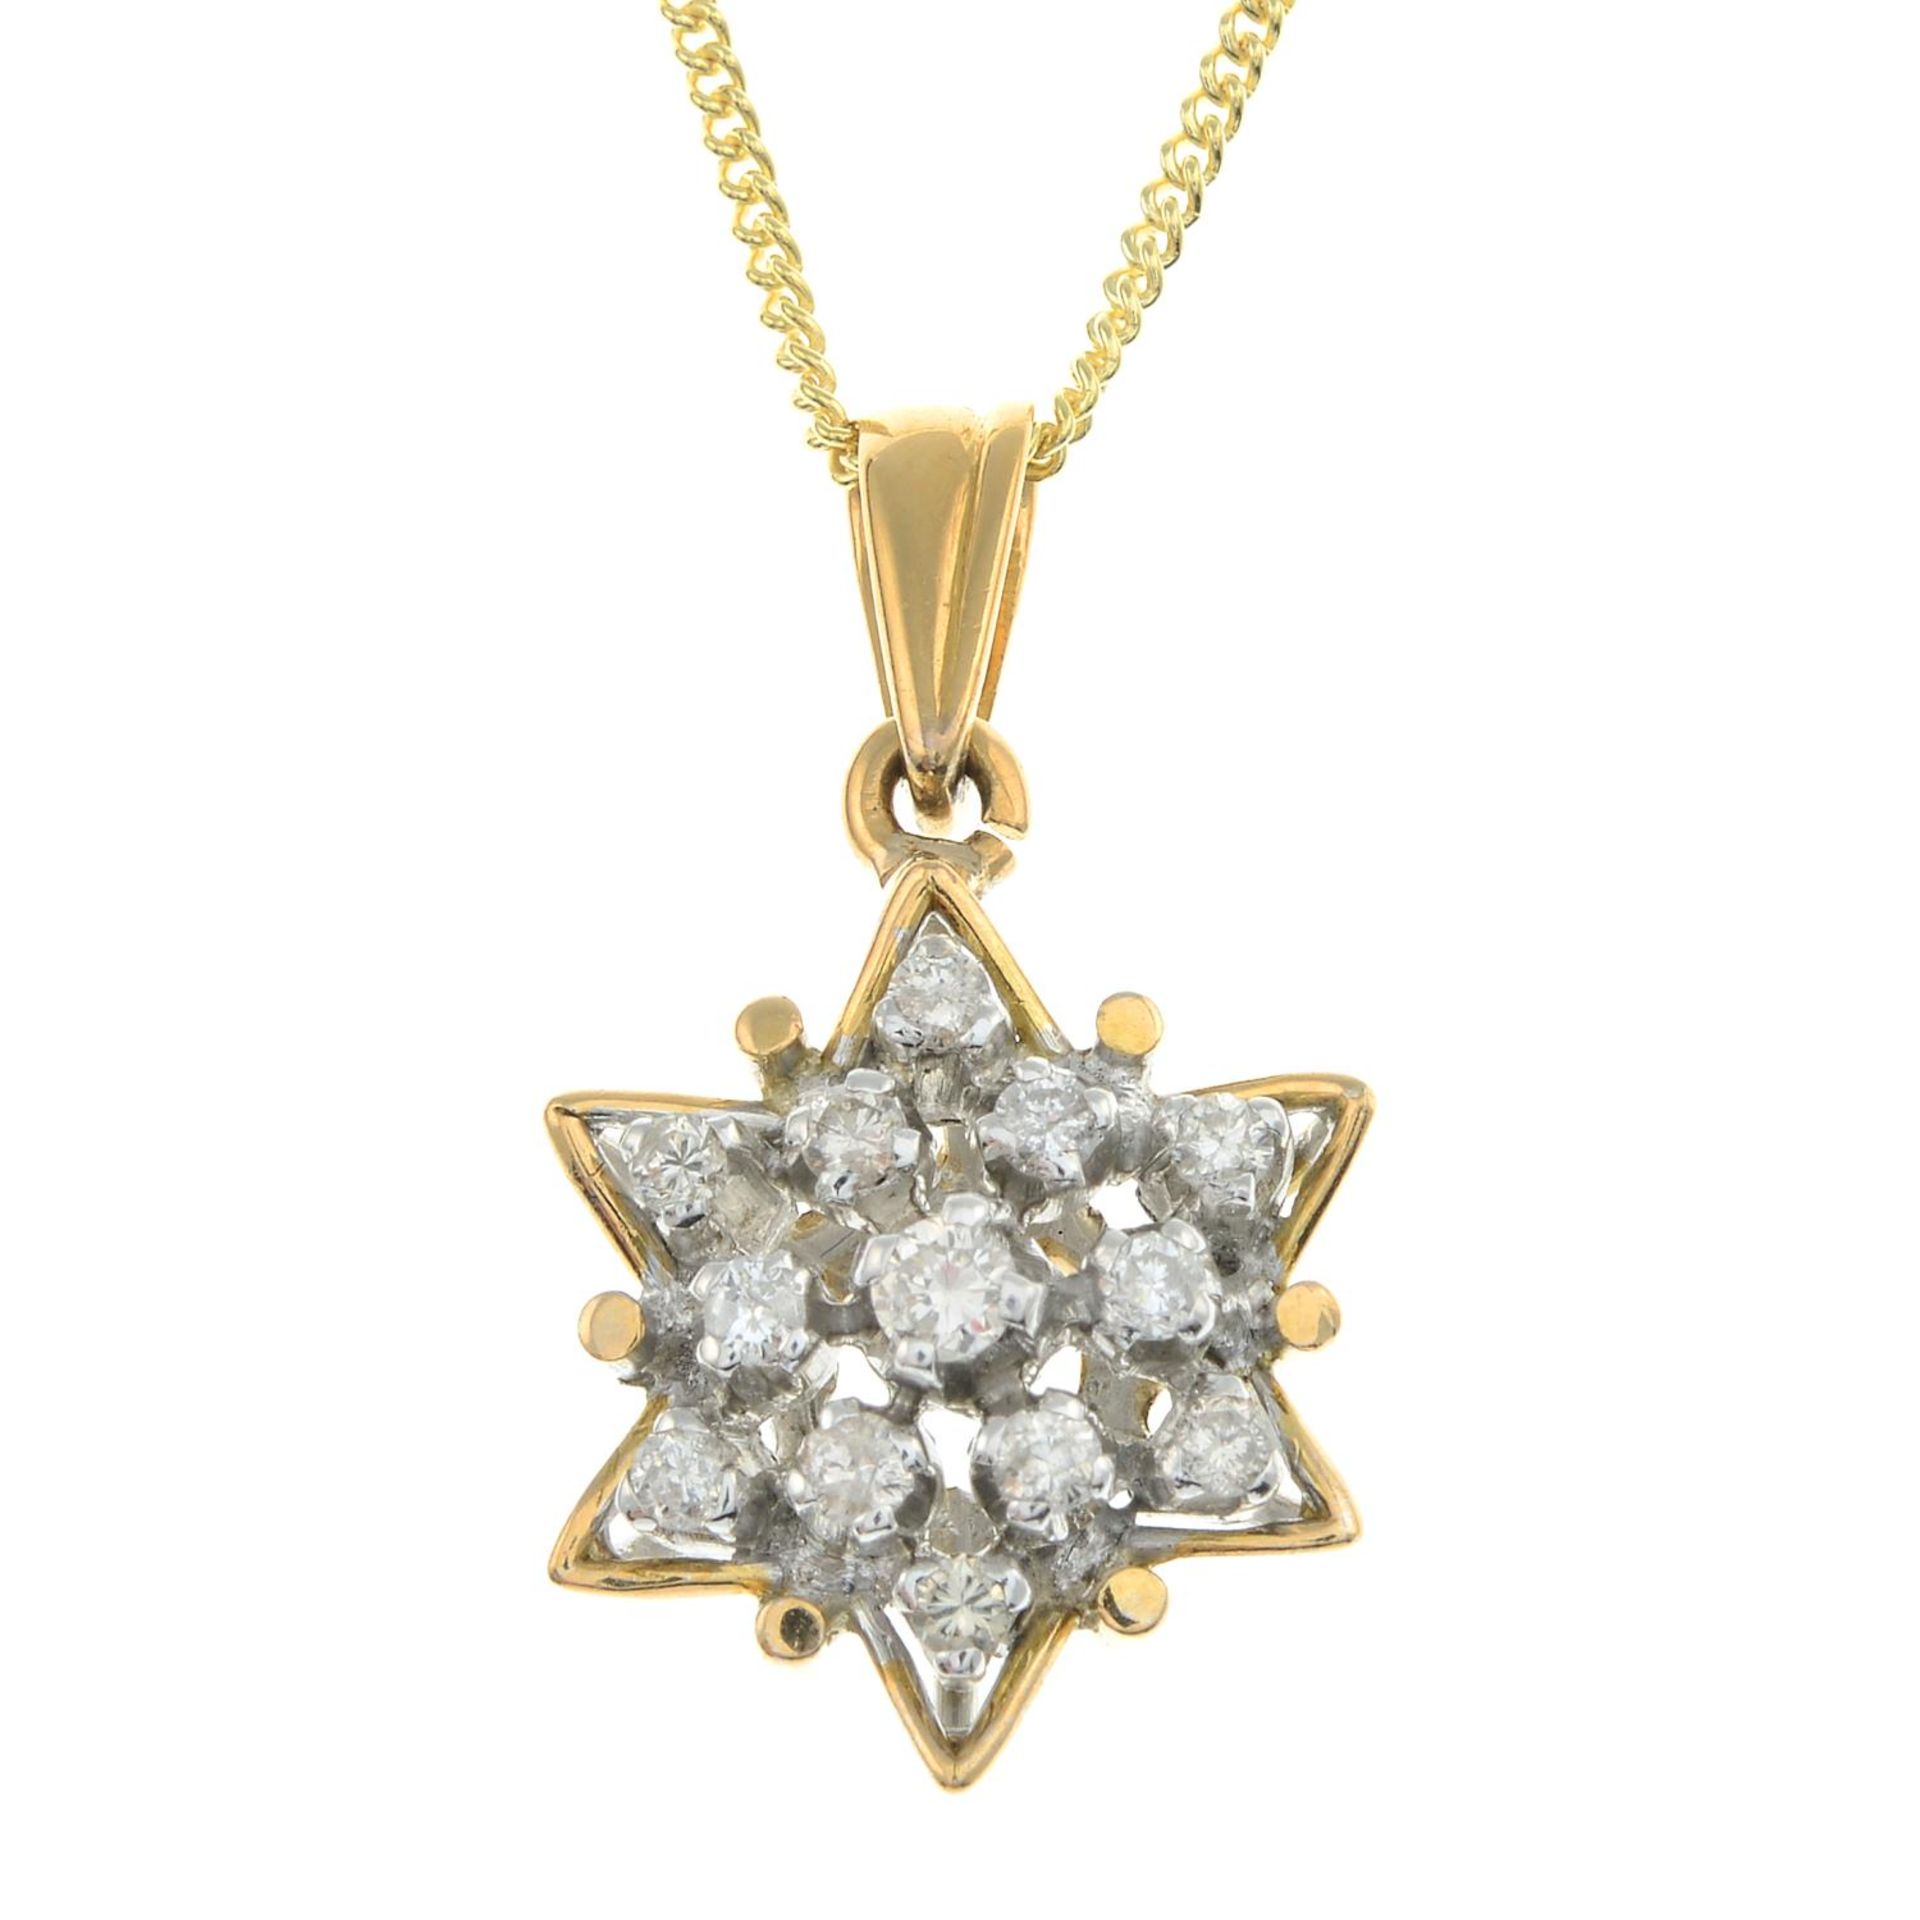 A diamond pendant, with 9ct gold chain.Estimated total diamond weight 0.50ct.